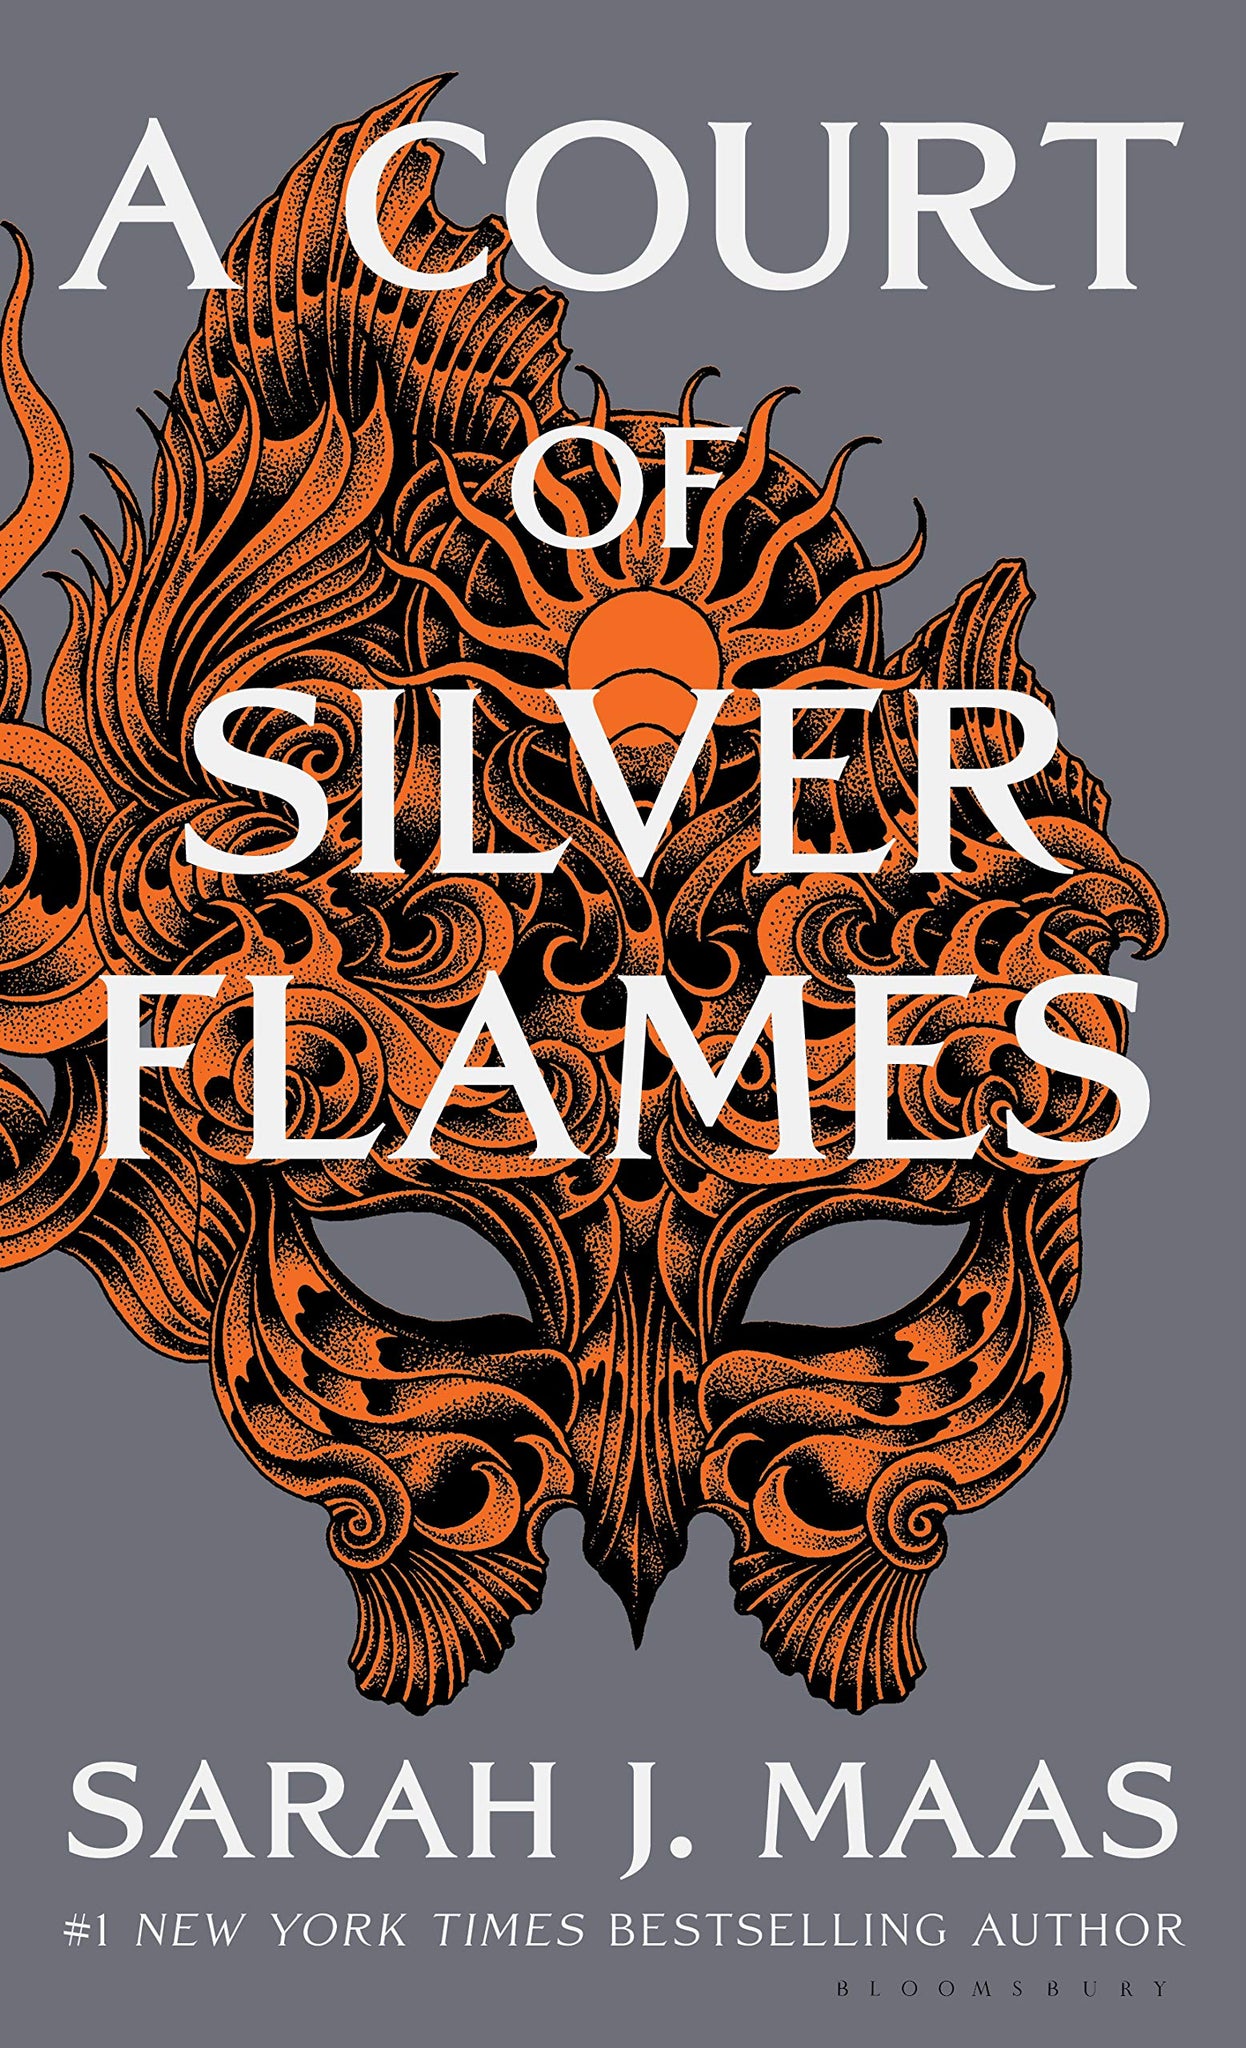 A Court of Thorns and Roses #4 : A Court of Silver Flames - Paperback